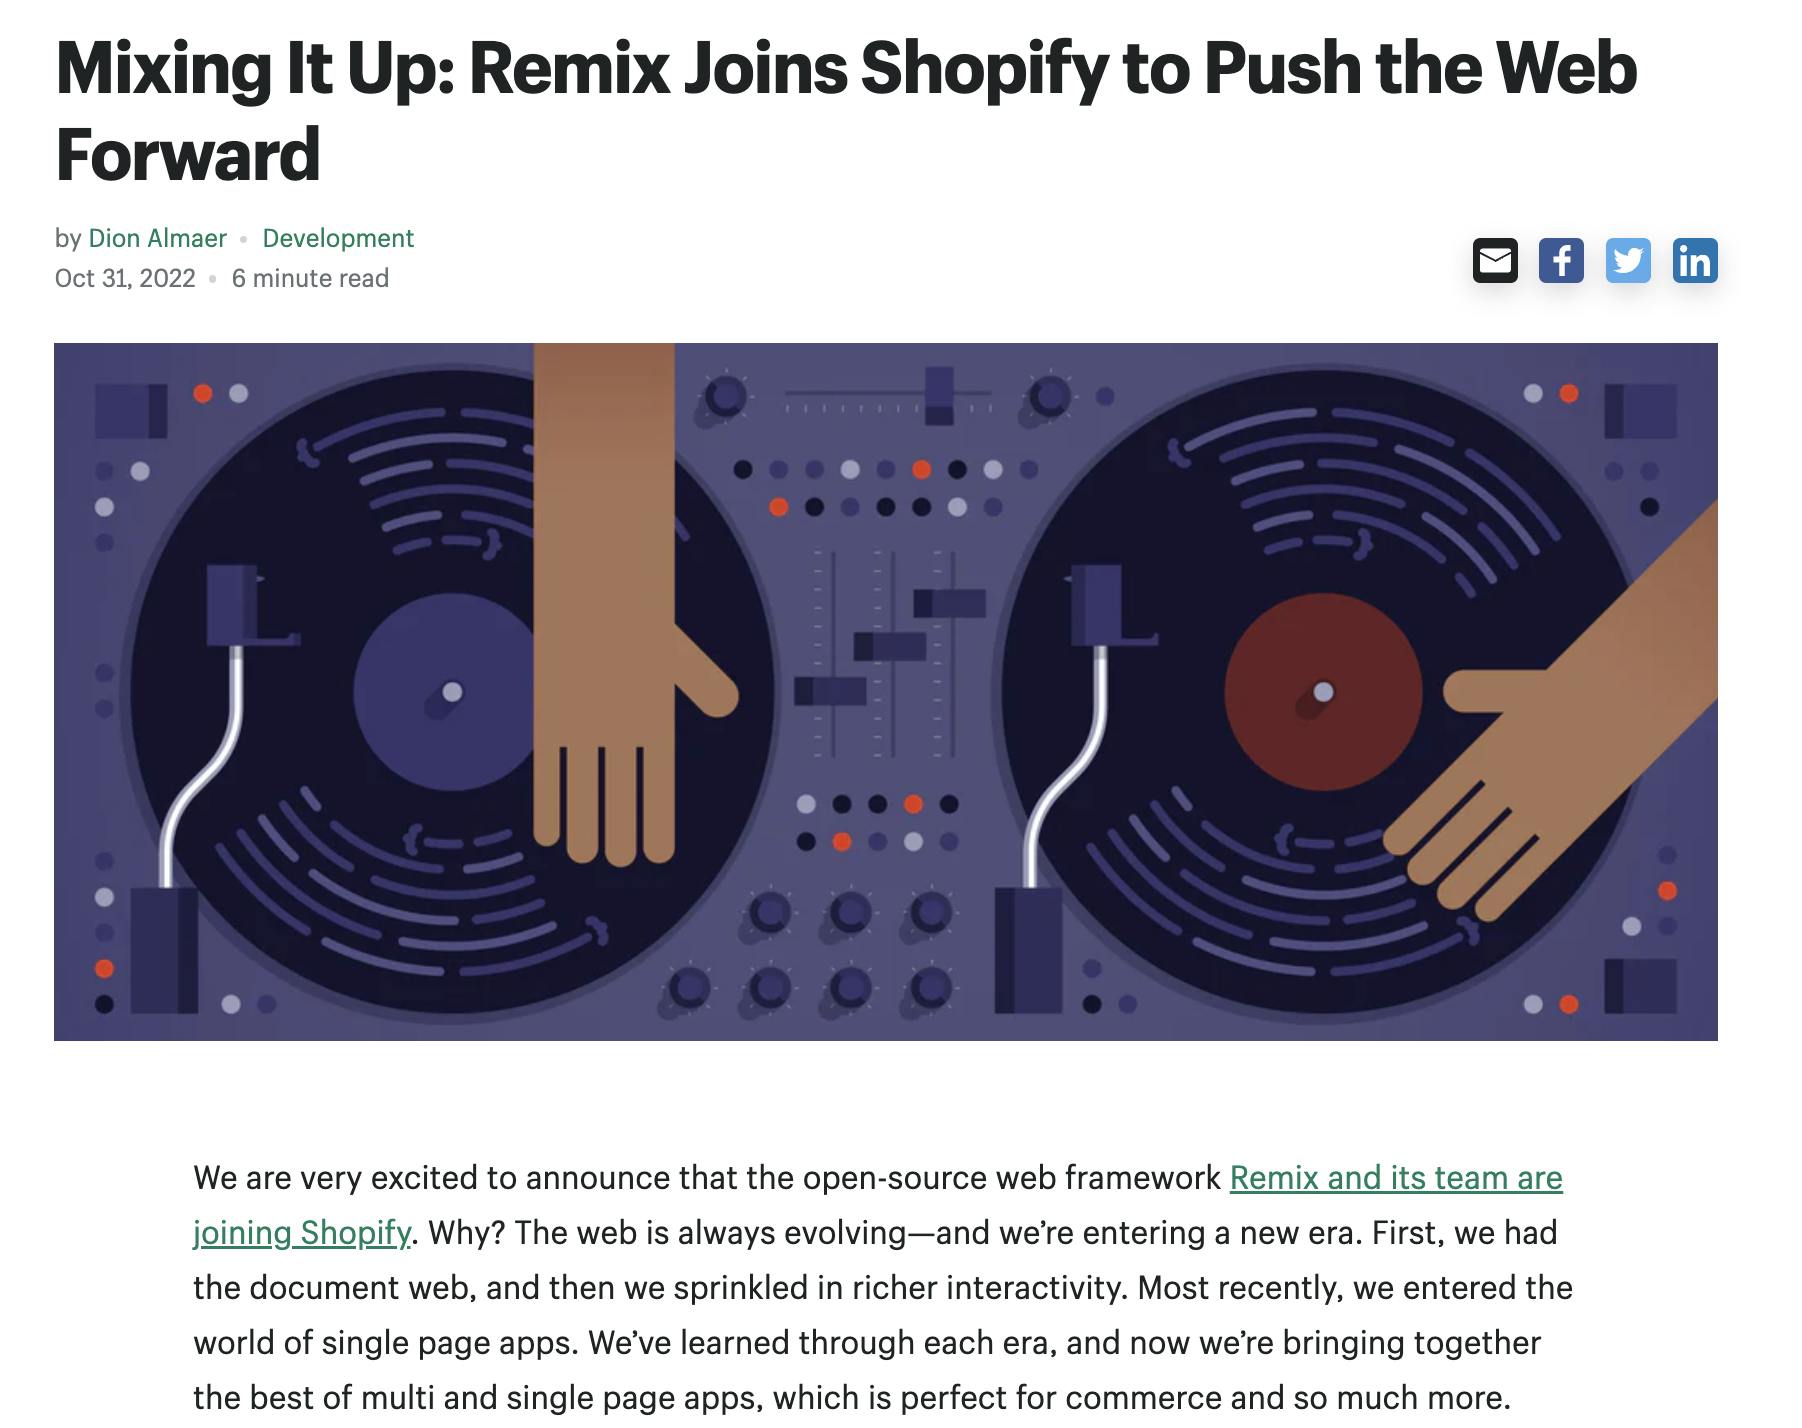 Shopify acquired Remix